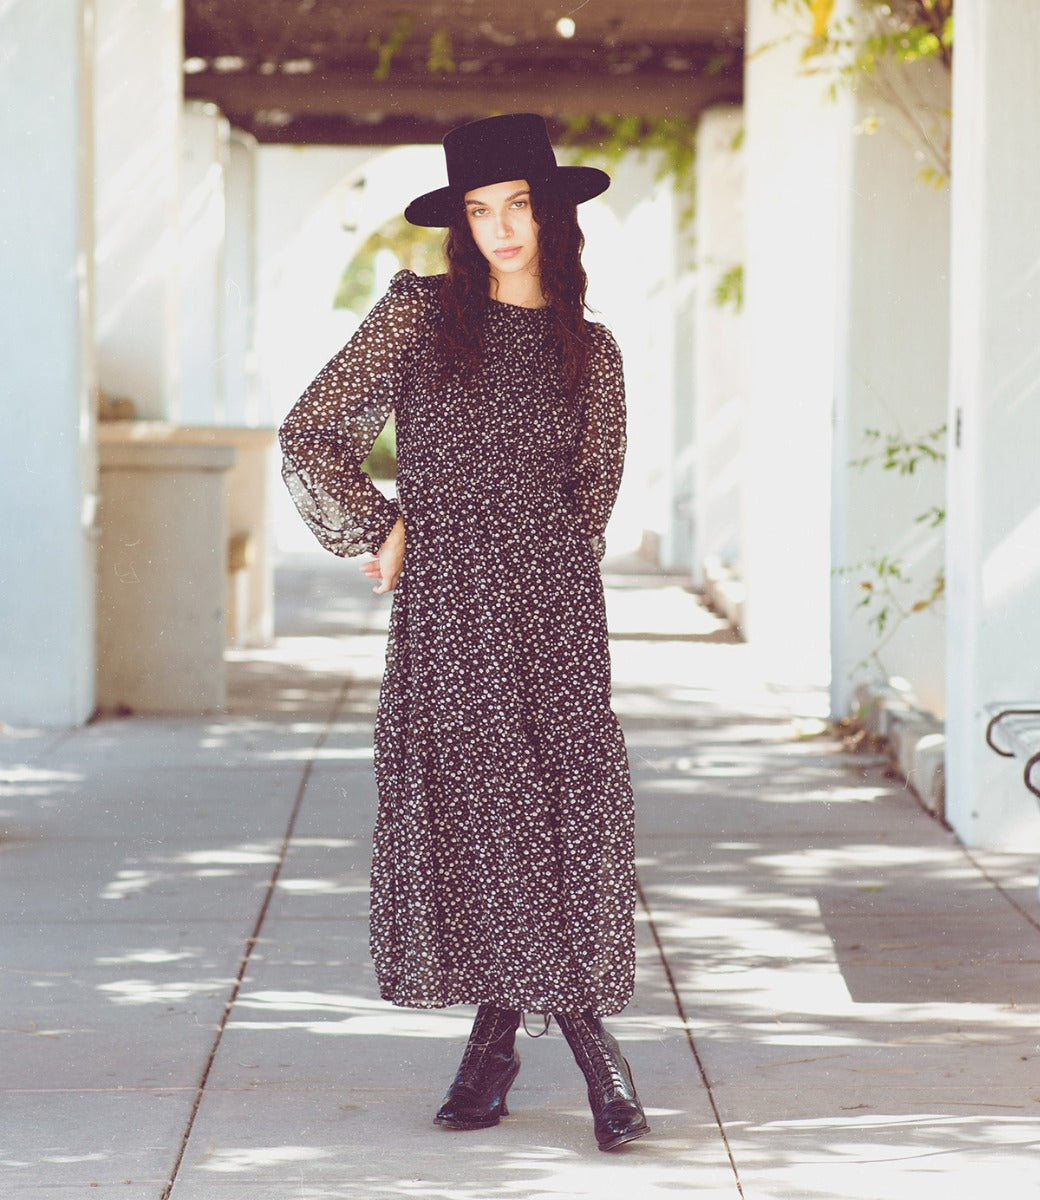 Oak Tree Farms, a woman wearing a black hat and dress, stepped out in style with her Mirabelle leather boots featuring grommet laces.